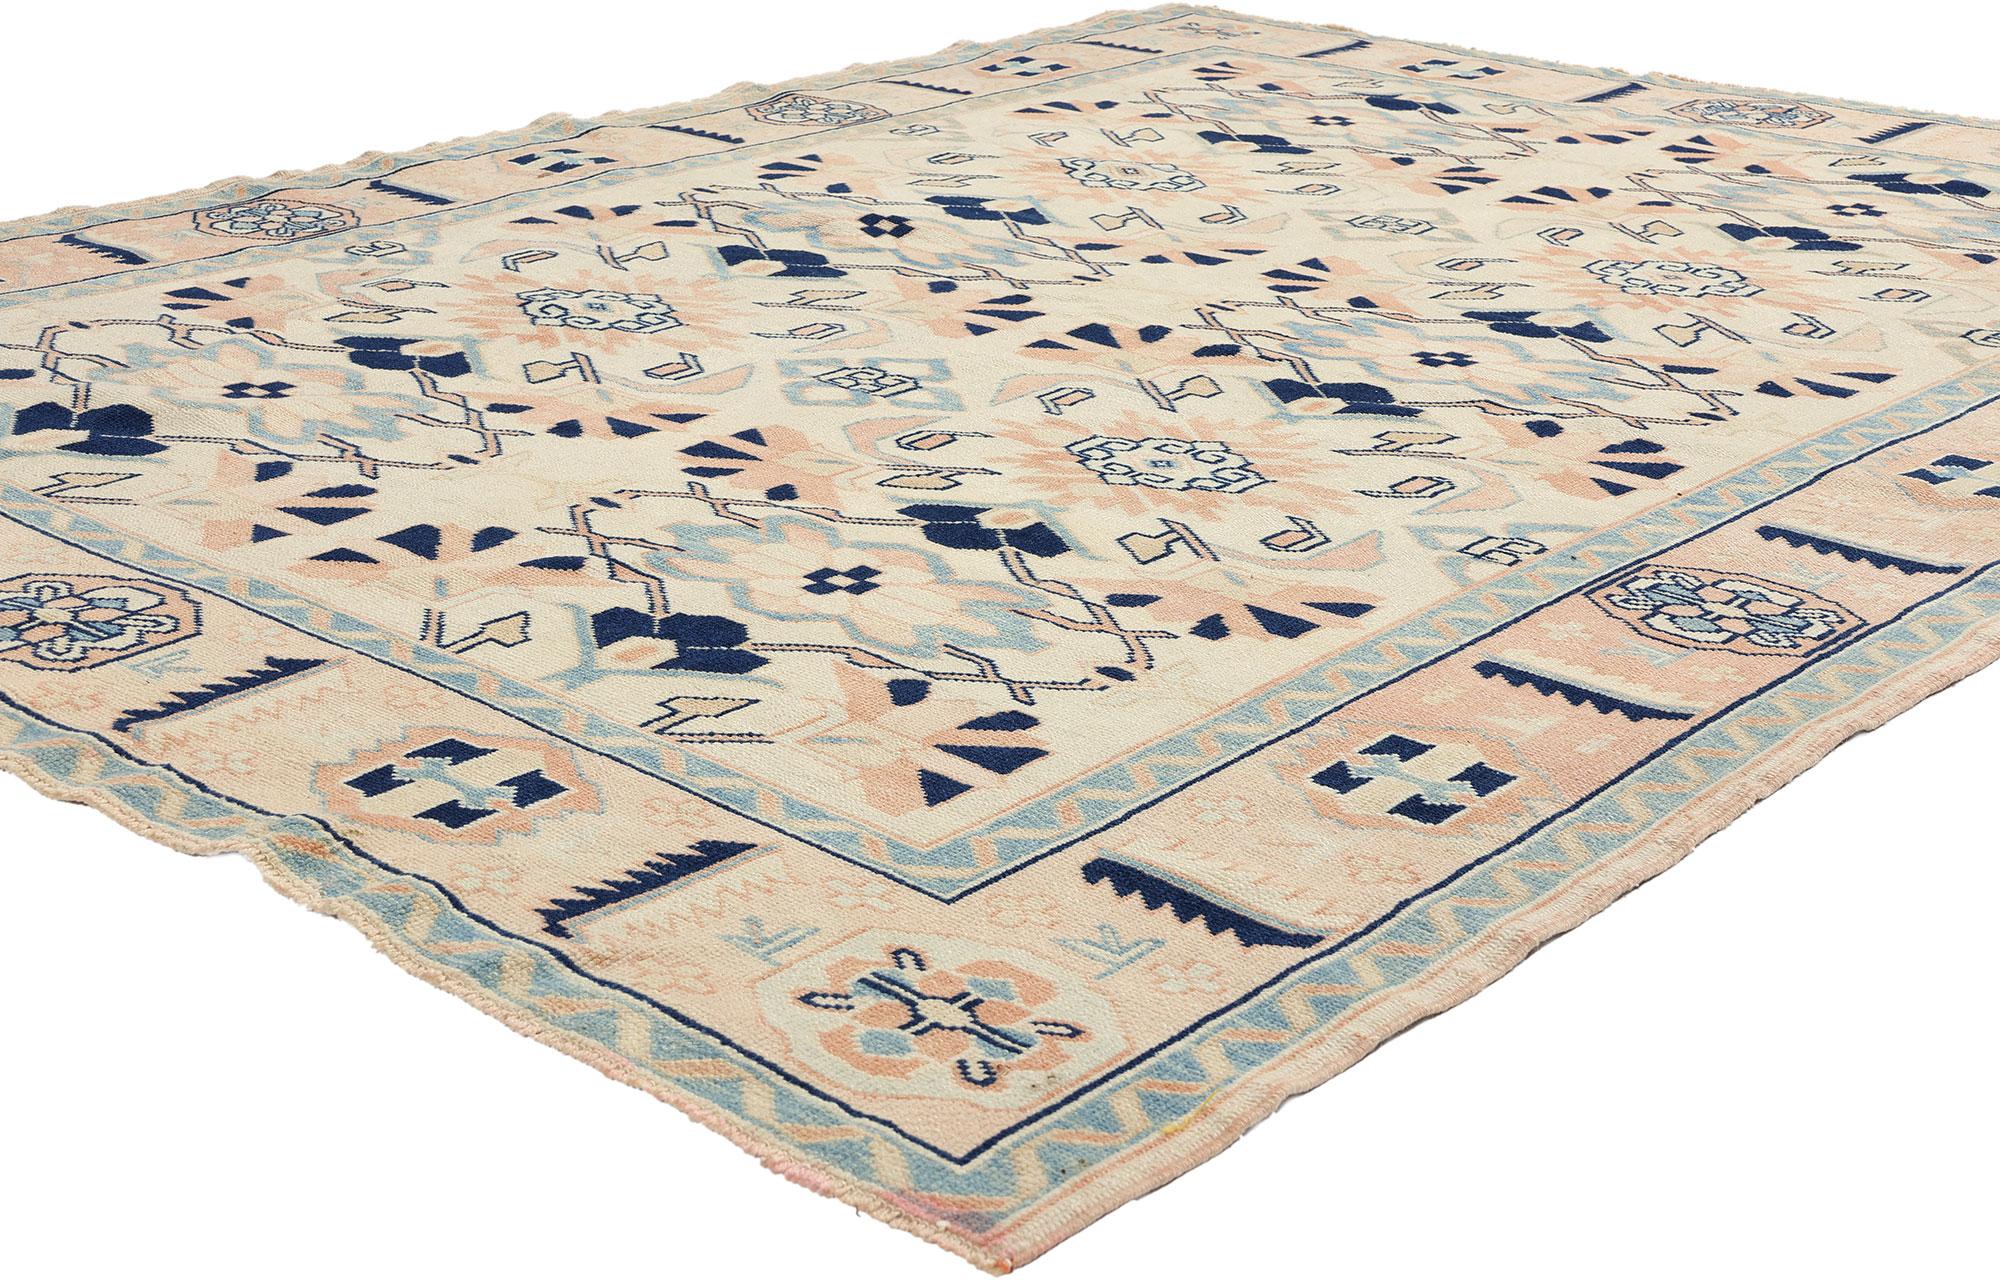 53935 Vintage Blue and Pink Turkish Oushak Rug, 05'02 x 06'11. Antique-washed Turkish Oushak rugs undergo a distinctive washing technique designed to bestow upon them an antique or vintage semblance characterized by soft hues. The objective is to